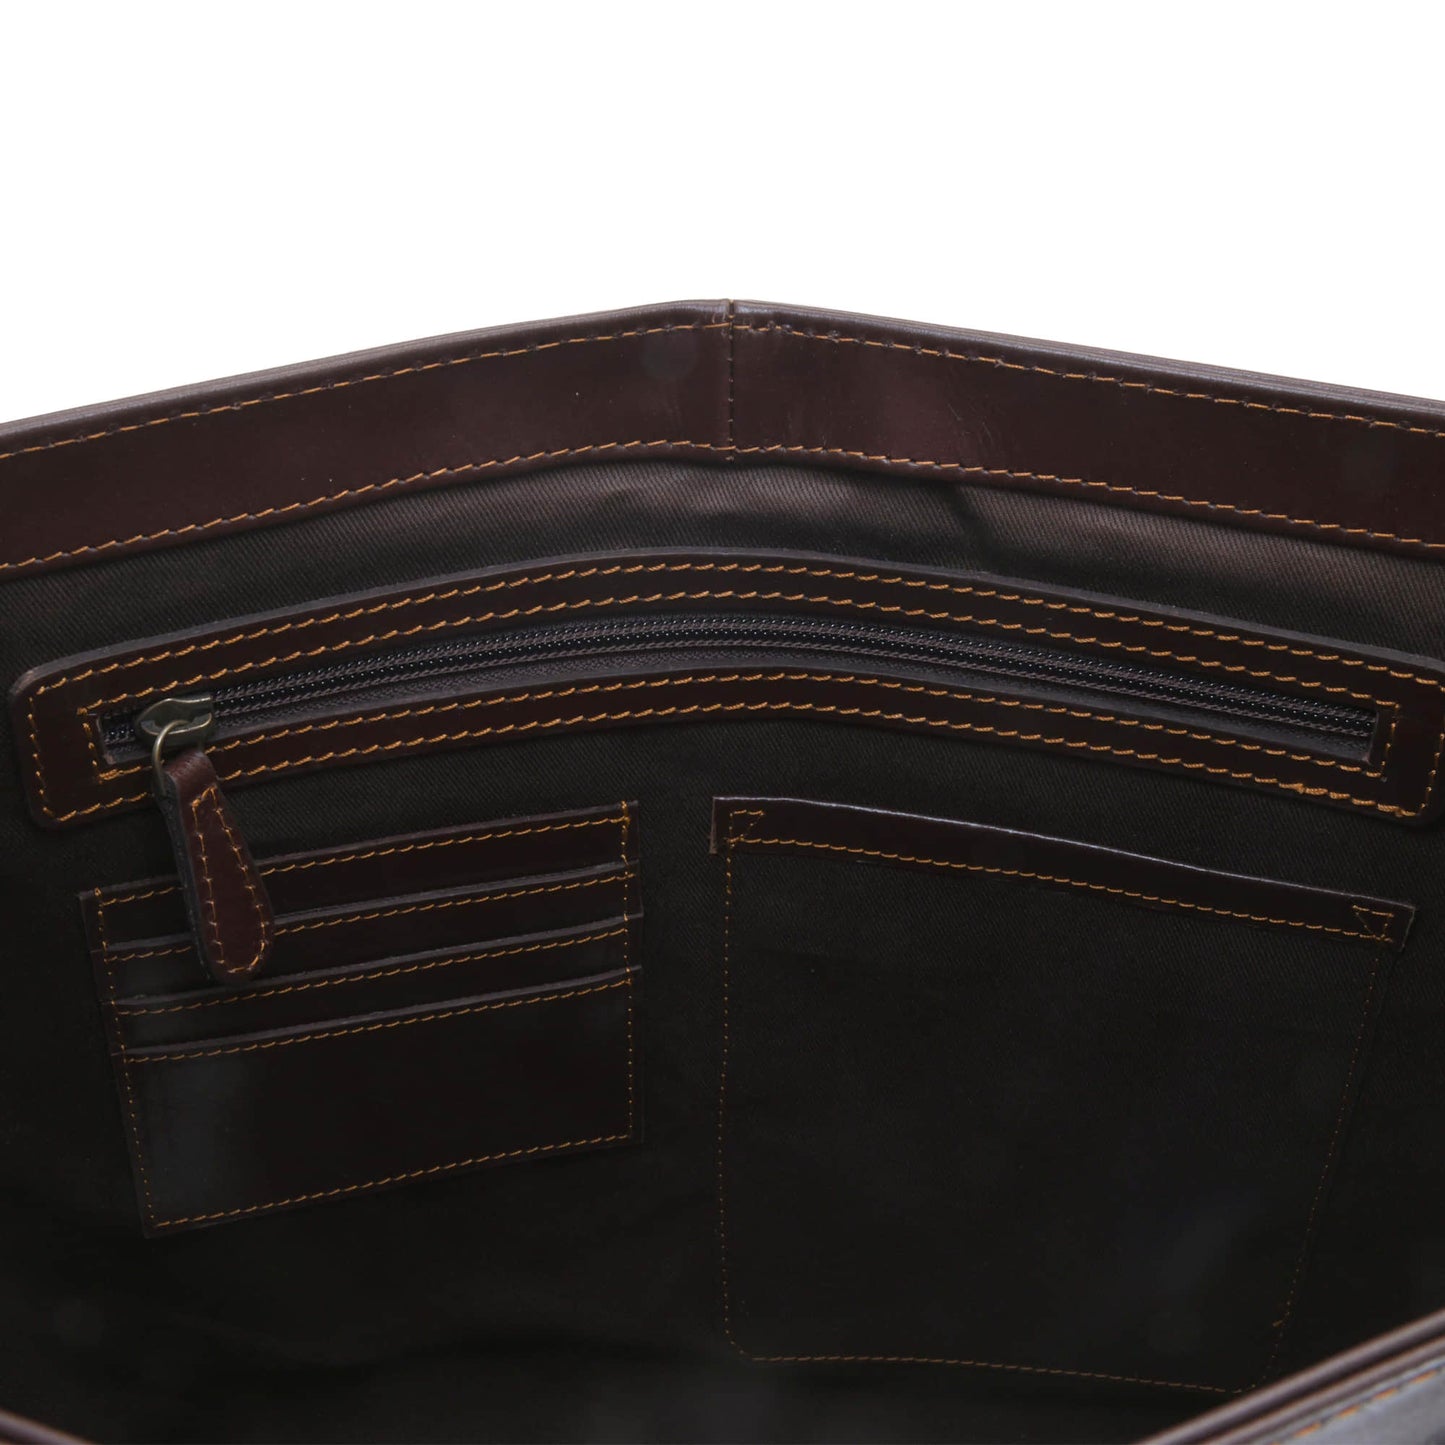 Style n Craft 392005 Messenger Bag in Full Grain Dark Brown Leather - Inside Back Wall View showing the Internal zipper pocket, credit and business card pockets and a pocket for holding the phone or small notebook